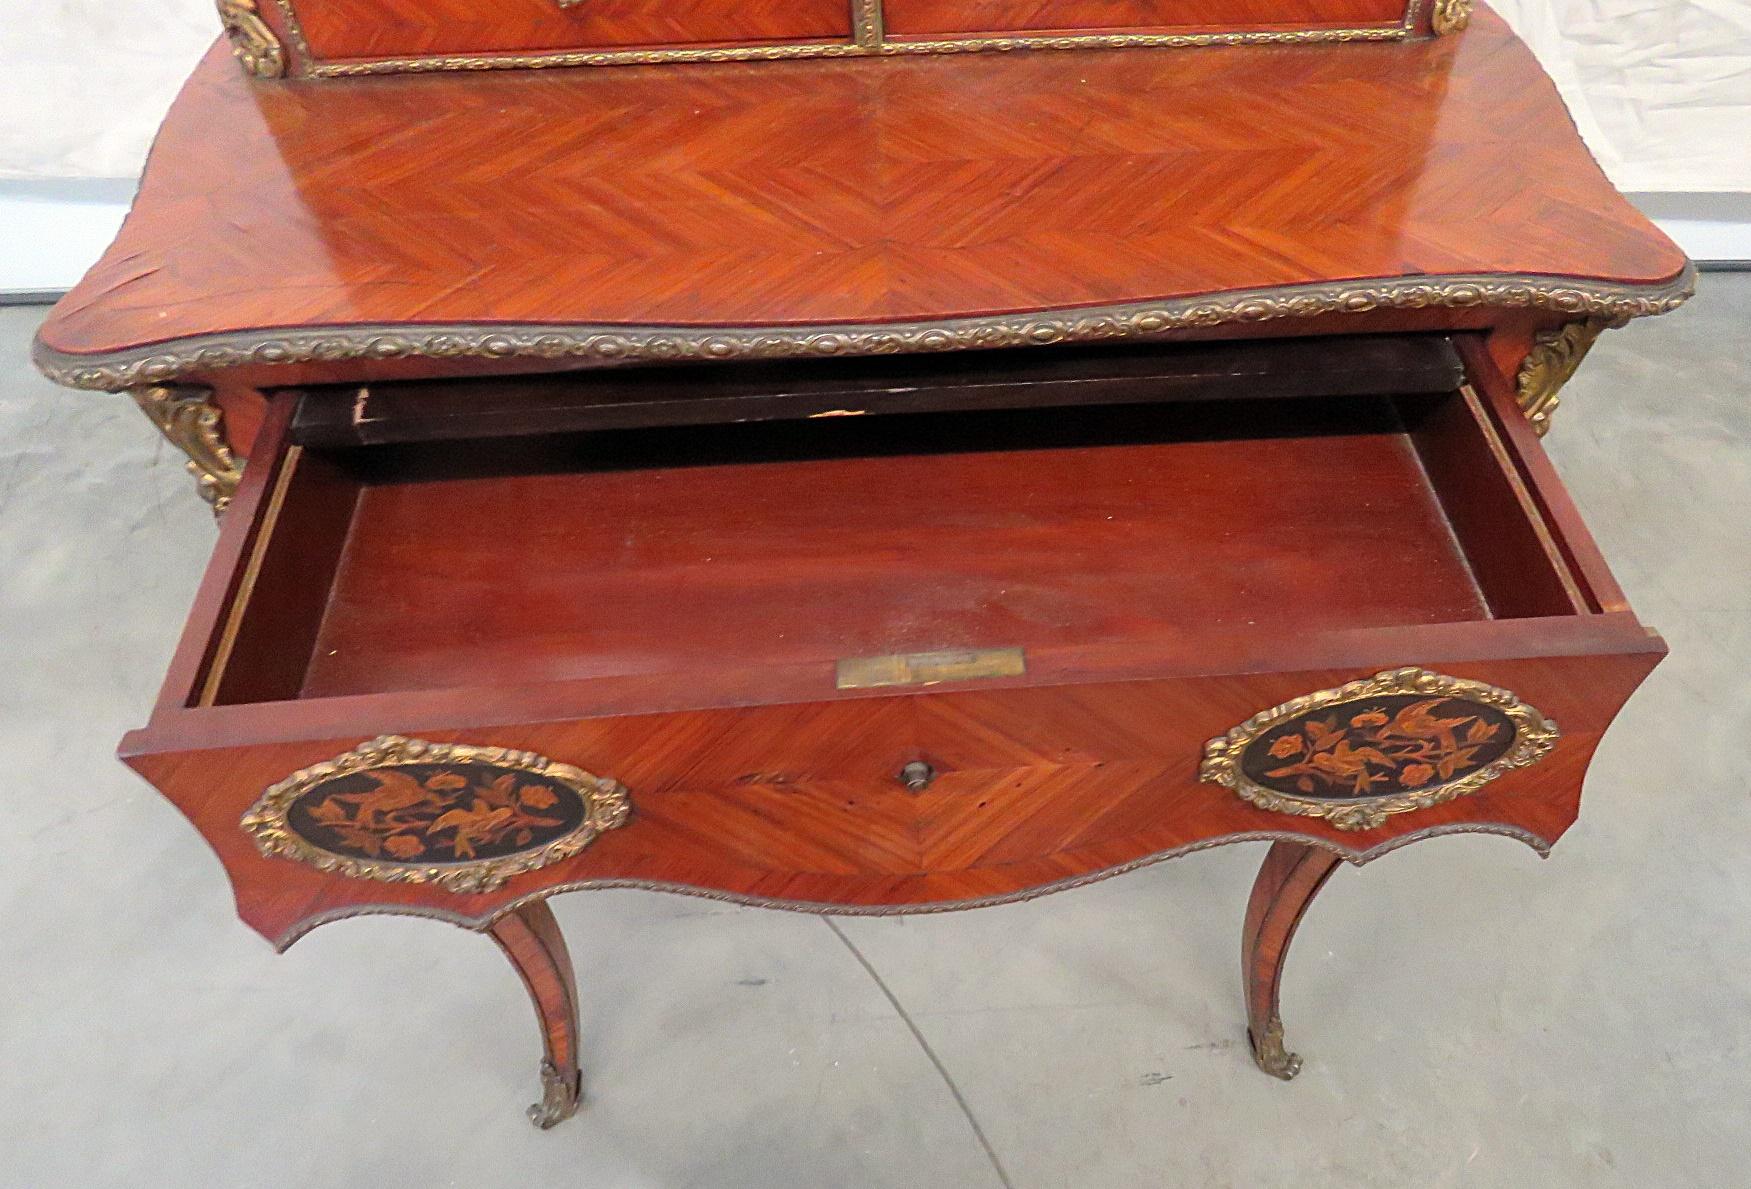 Antique C1870s French Louis XVI Style Inlaid King Wood Ladies Writing Desk For Sale 4